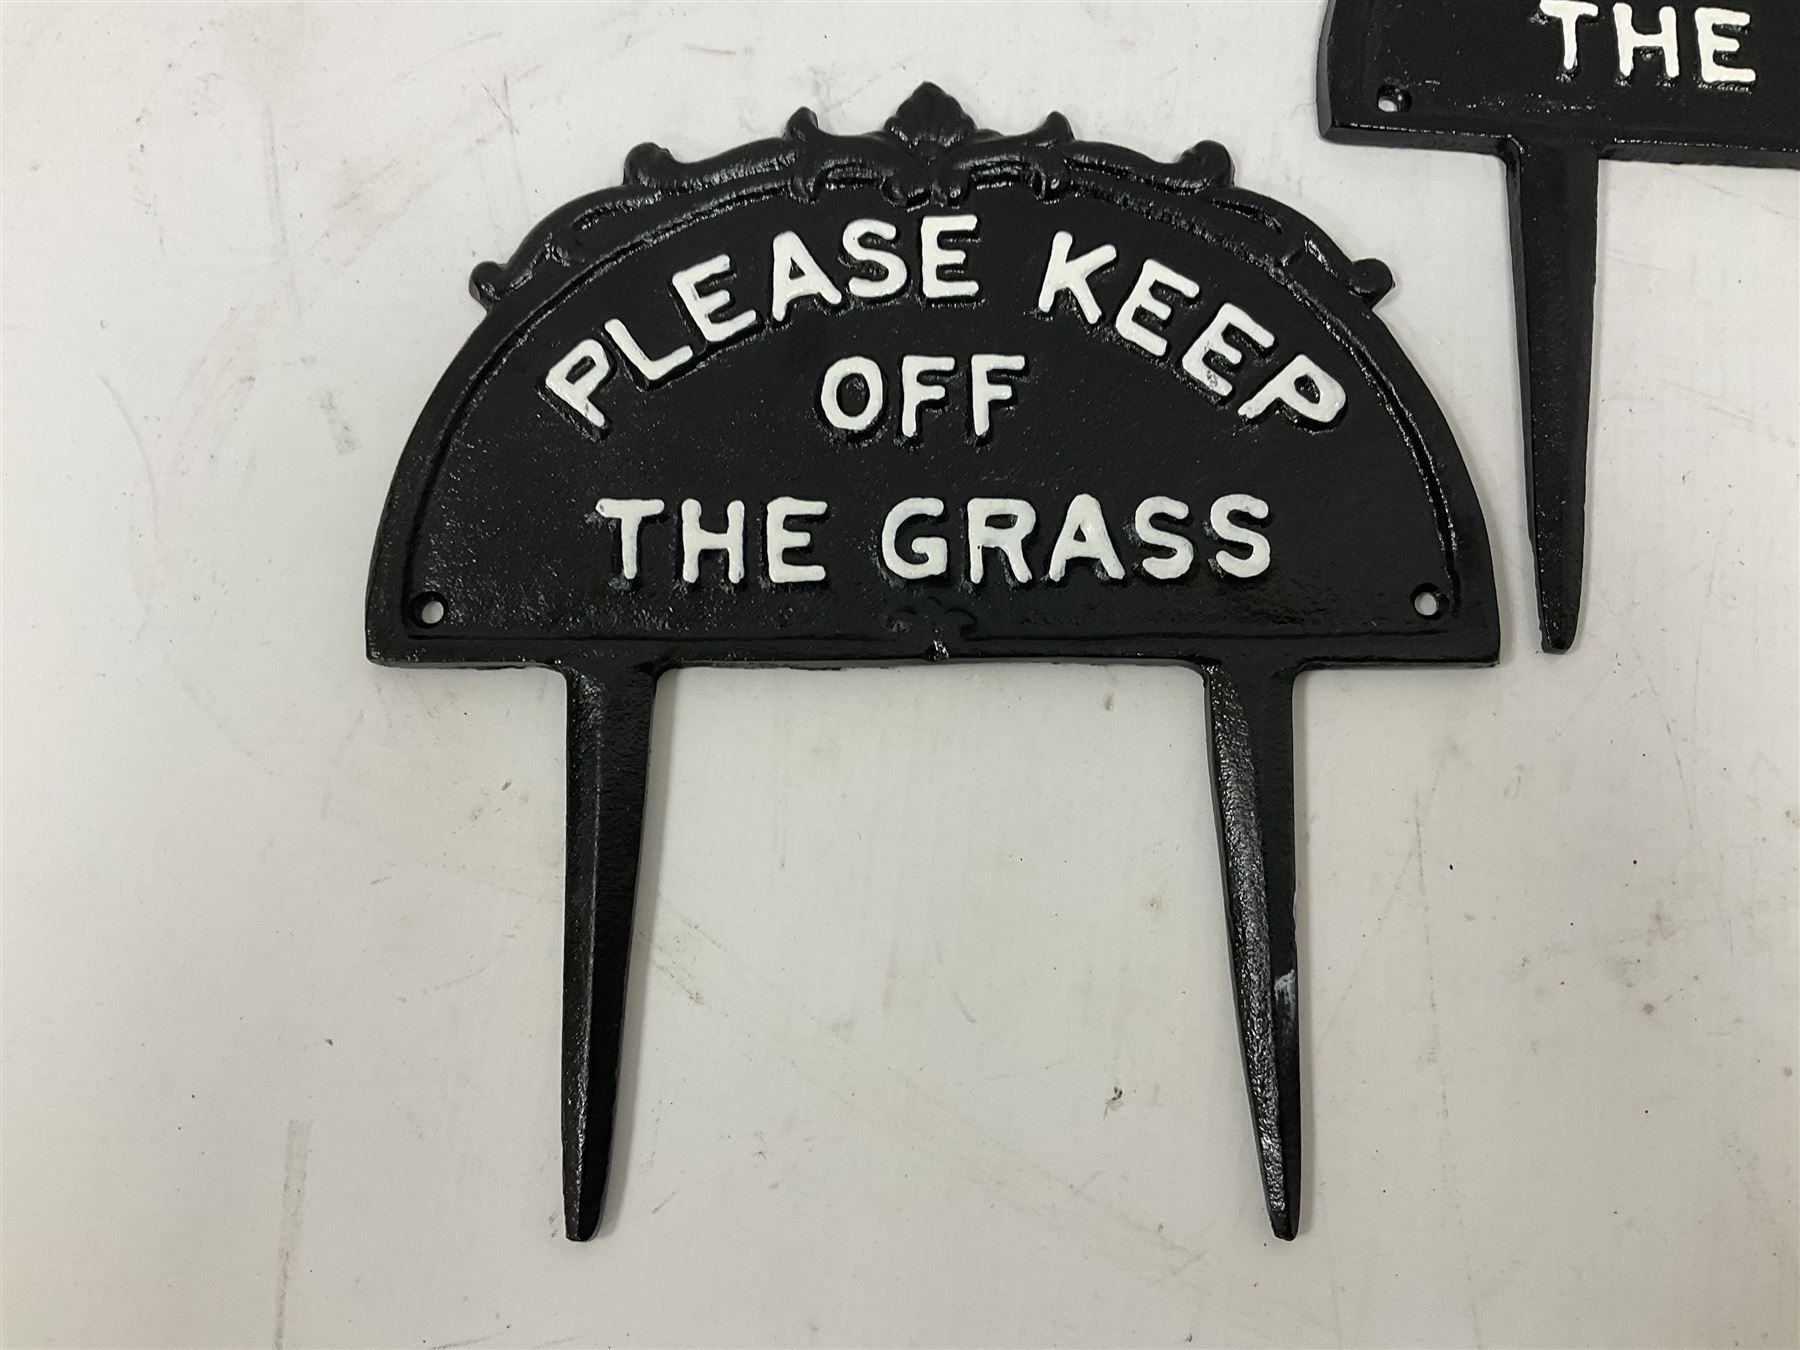 Three Please Keep Off the Grass cast iron sign - Image 3 of 6